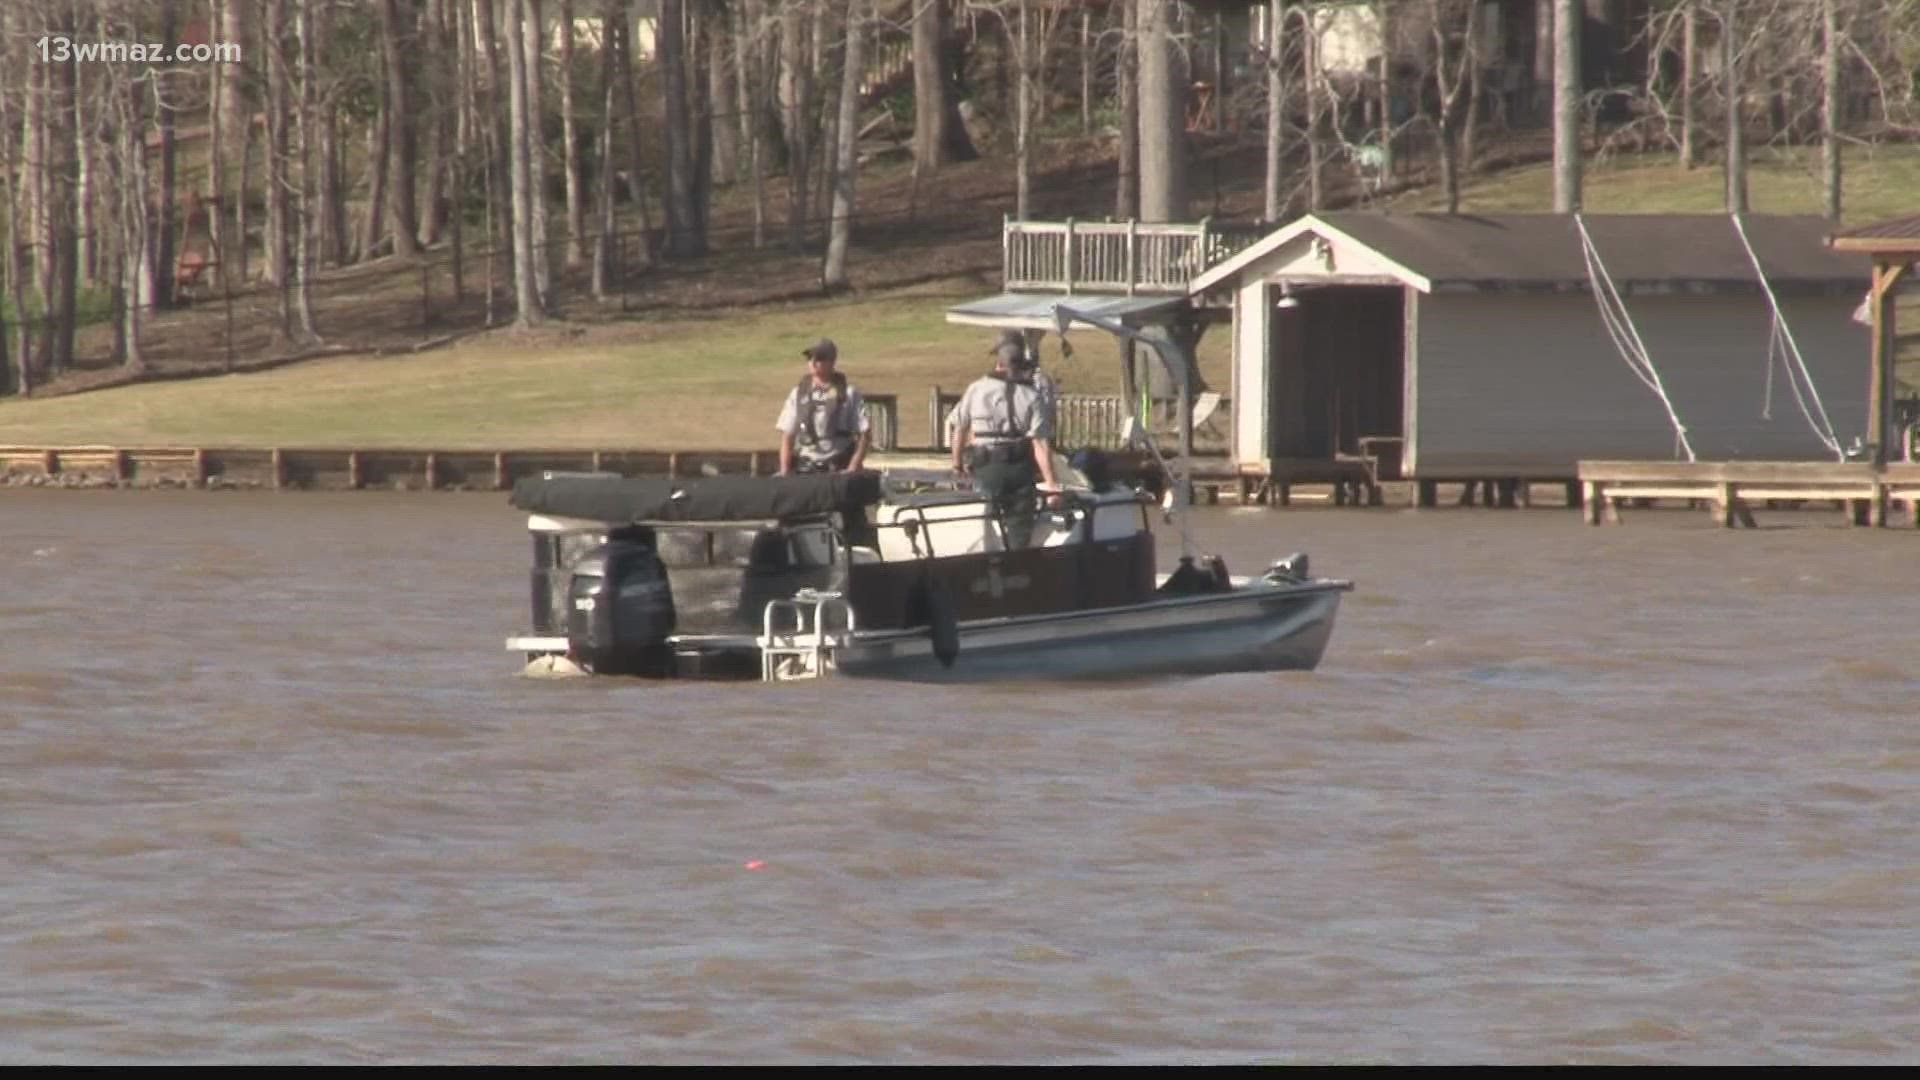 If they can't search Wednesday, they'll restart the search Thursday morning, according to Sgt. Lee Brown with Ga. DNR.